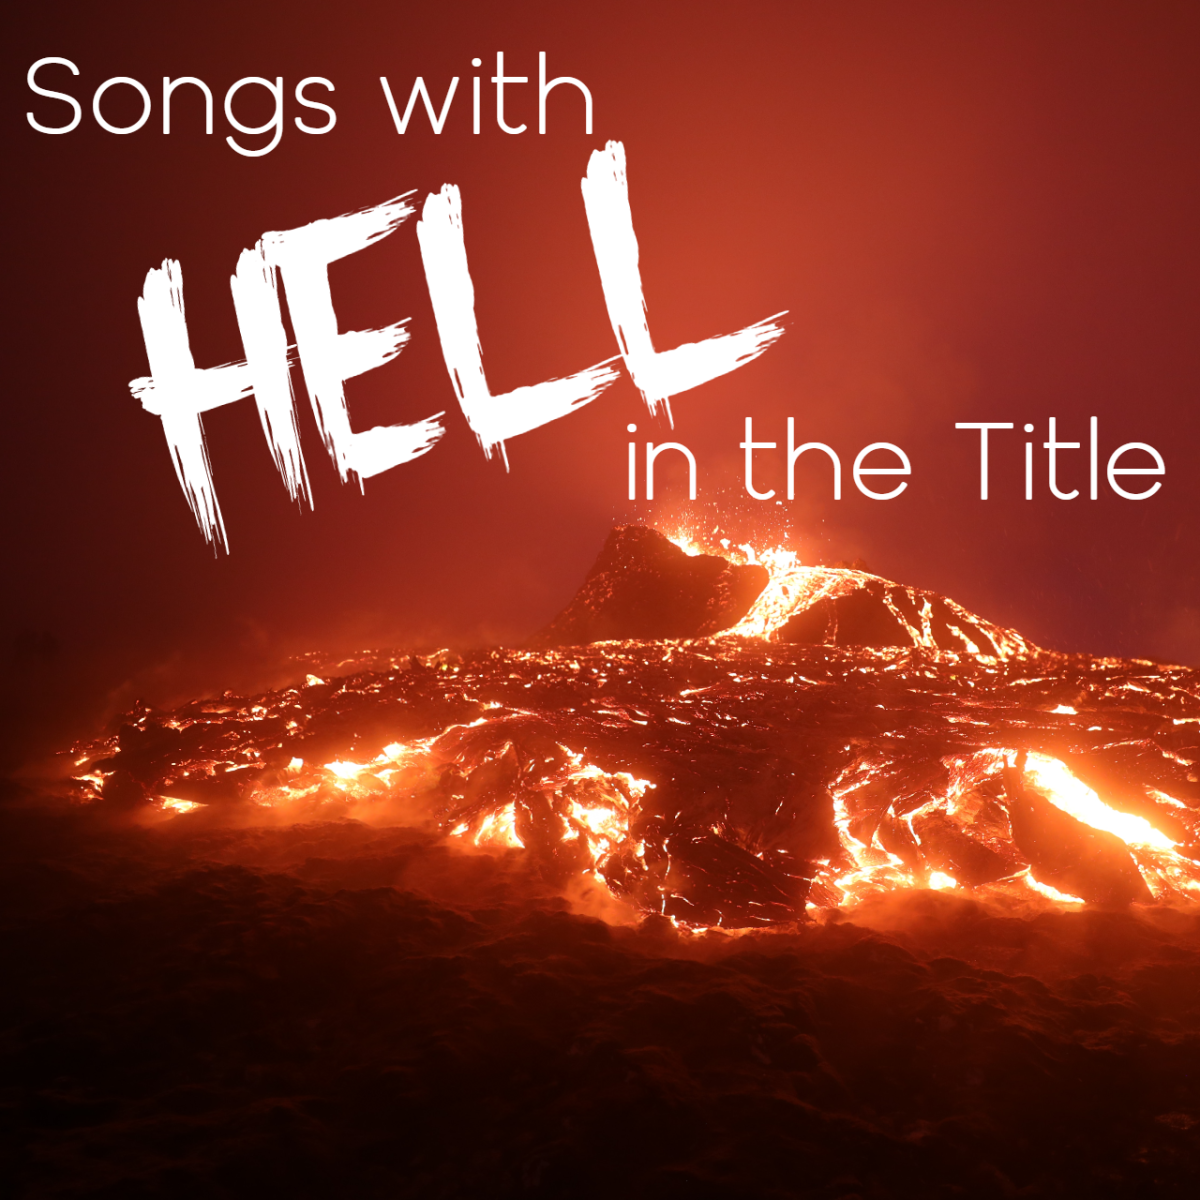 Make a helluva playlist of pop, rock, country, and R&B songs with hell in the title. Hell isn't just a place to fry in forever. It can be a state of mind or a mild expletive used to convey emphasis or emotion or important points. 